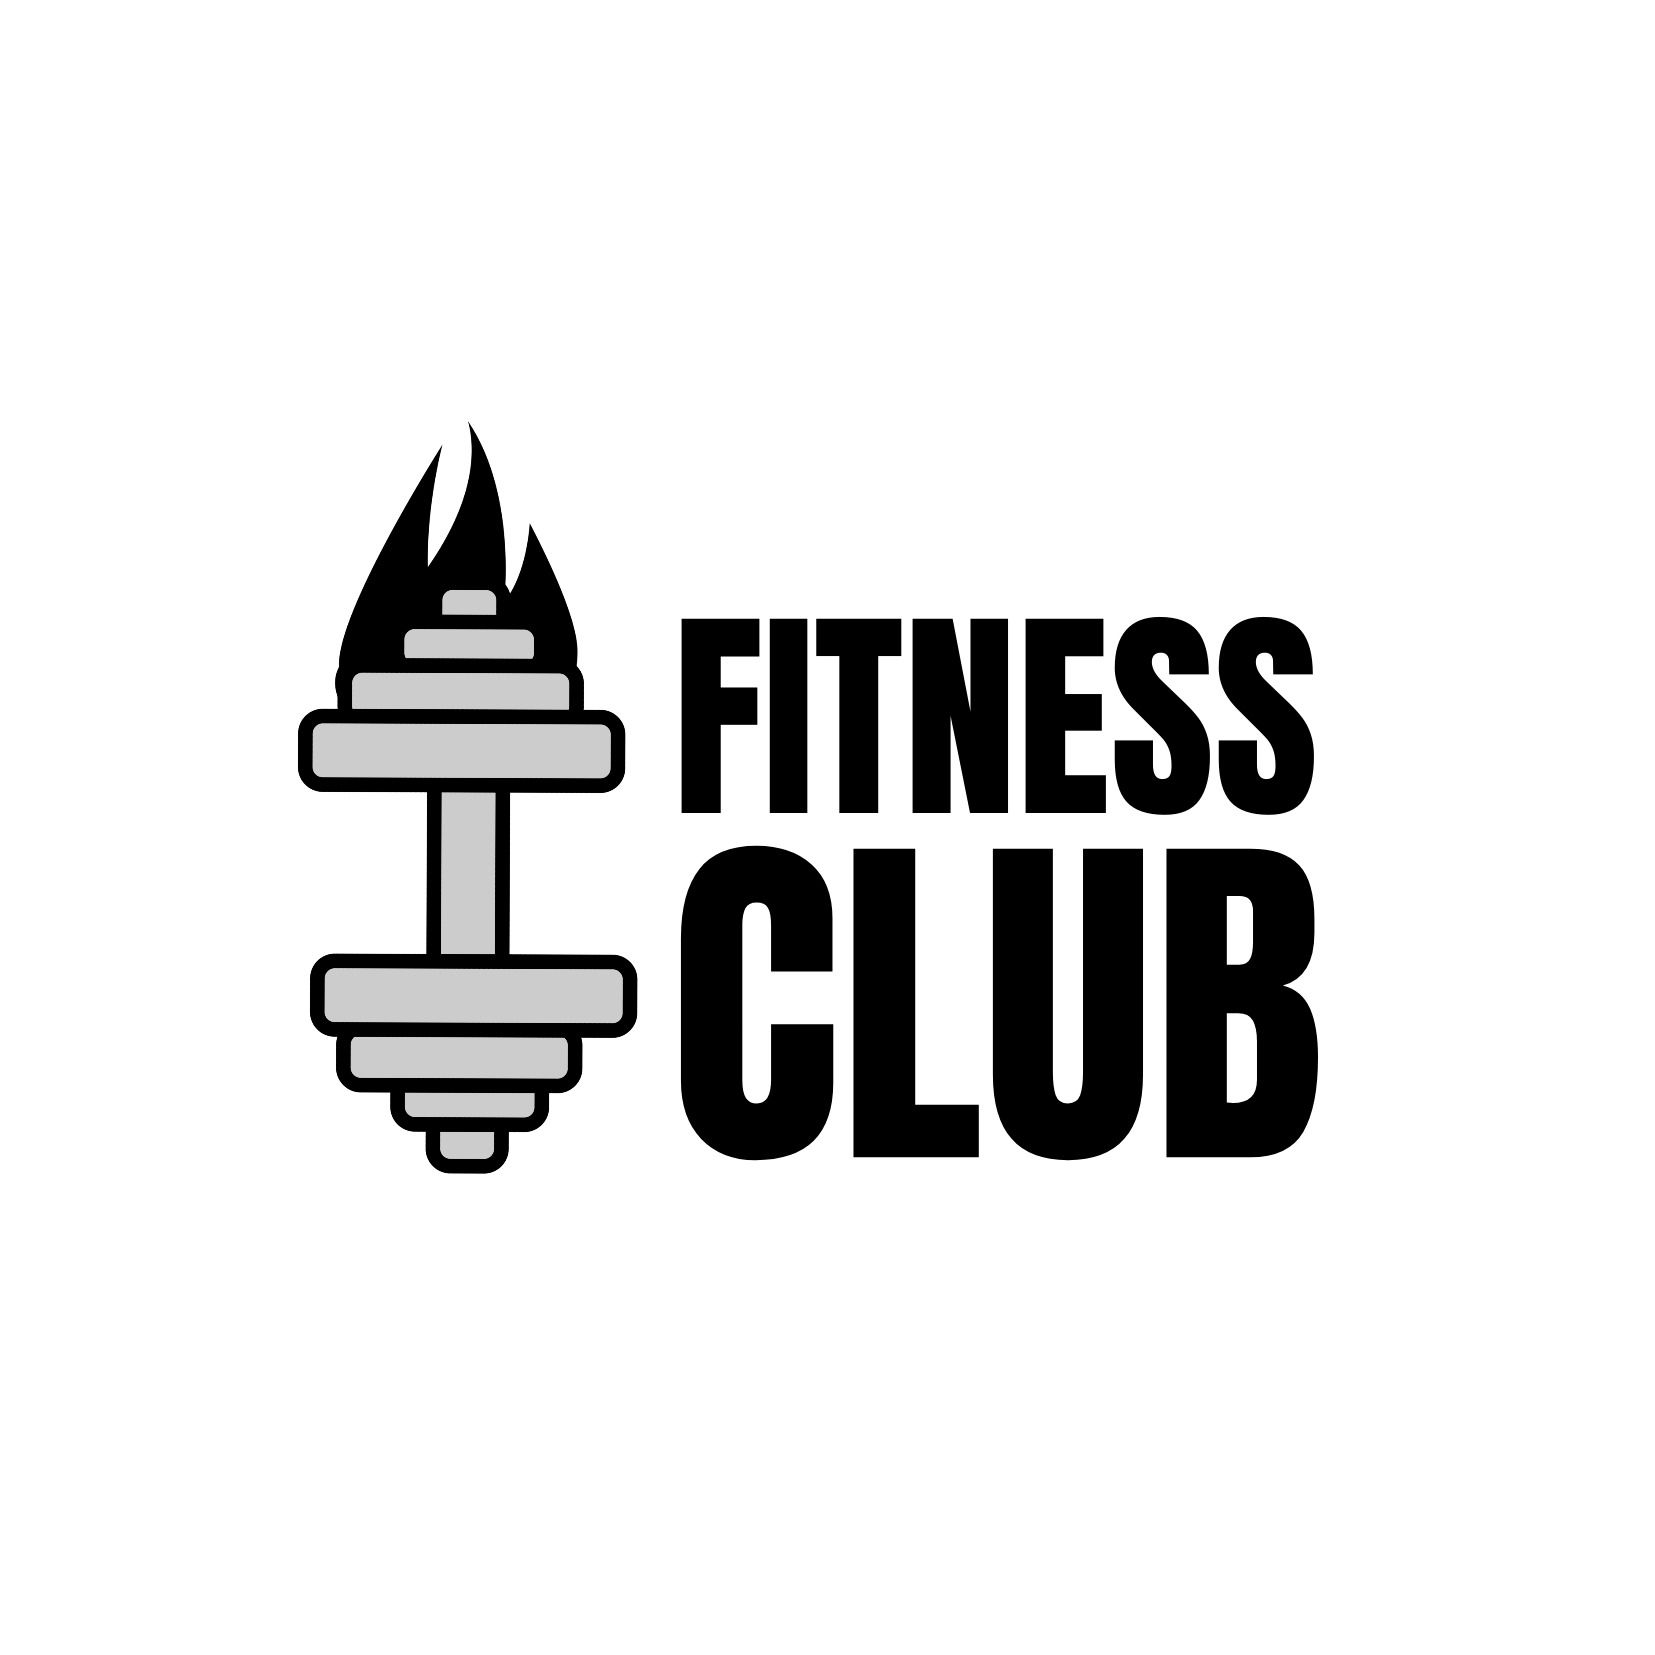 Fitness Creative Logo Designs - A step-by-step guide to creative logo design - Image